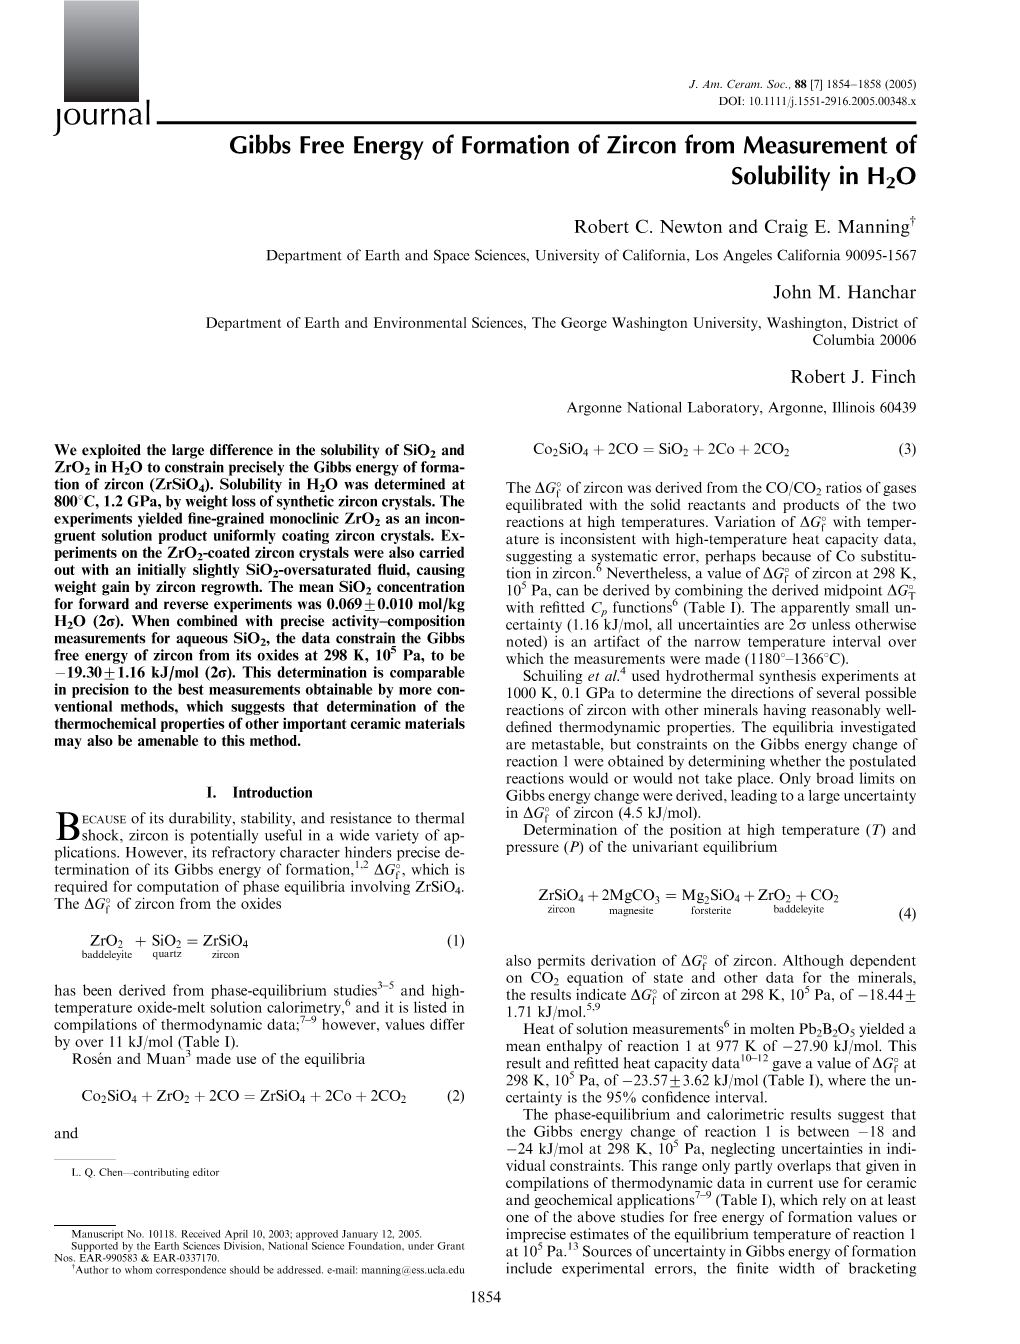 Journal Gibbs Free Energy of Formation of Zircon from Measurement of Solubility in H2O